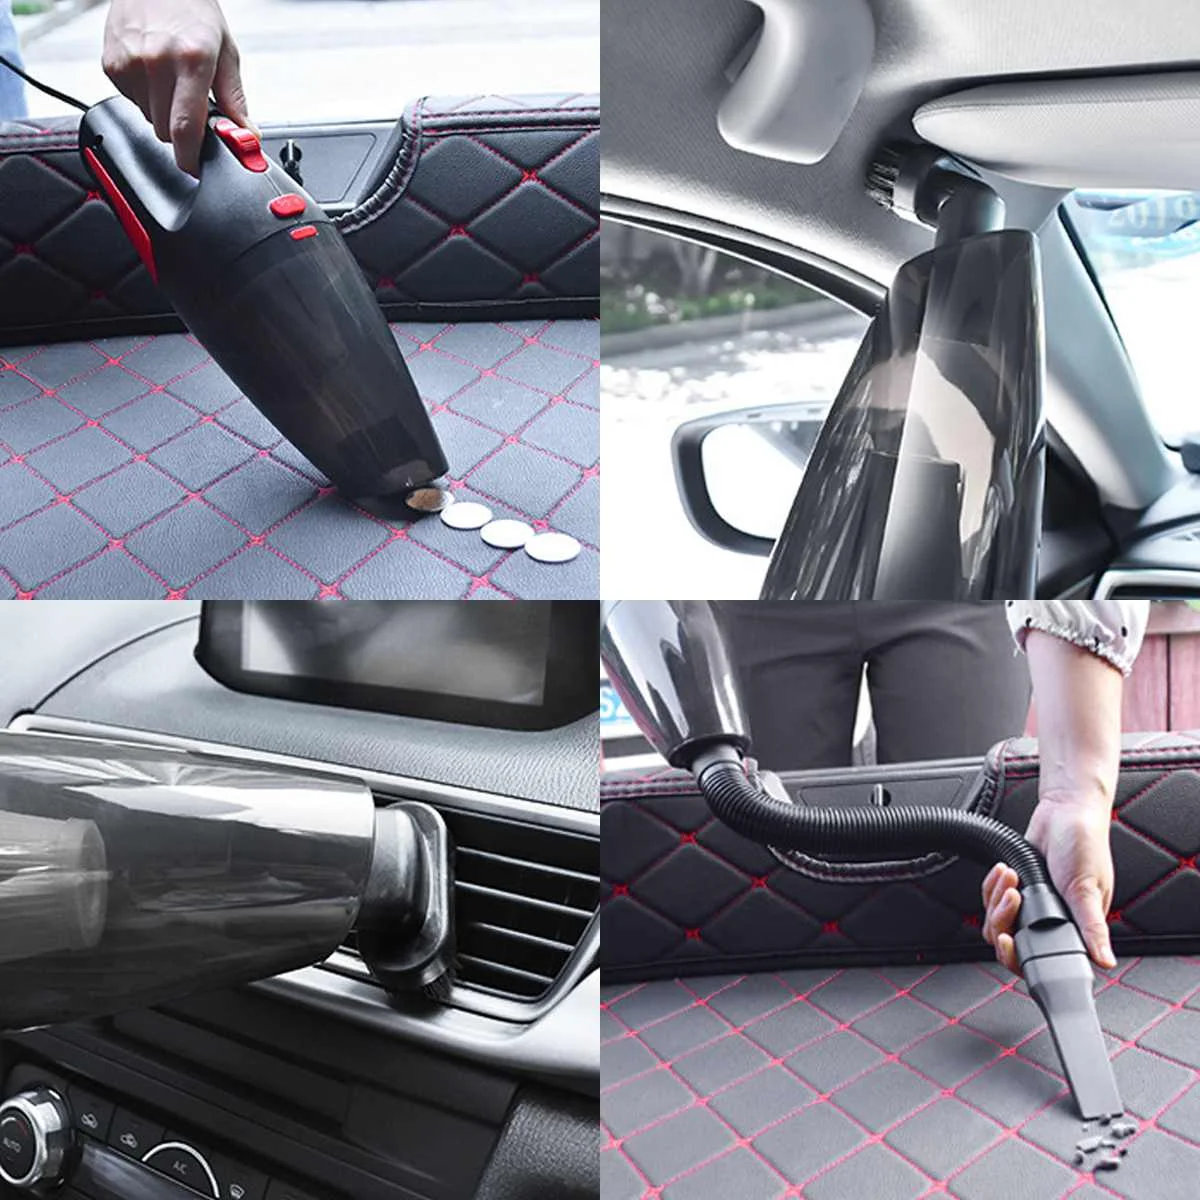 Portable 4m cord length handheld car vacuum cleaner wet/dry vaccum cleaner for car home 120w 12v 5000pa